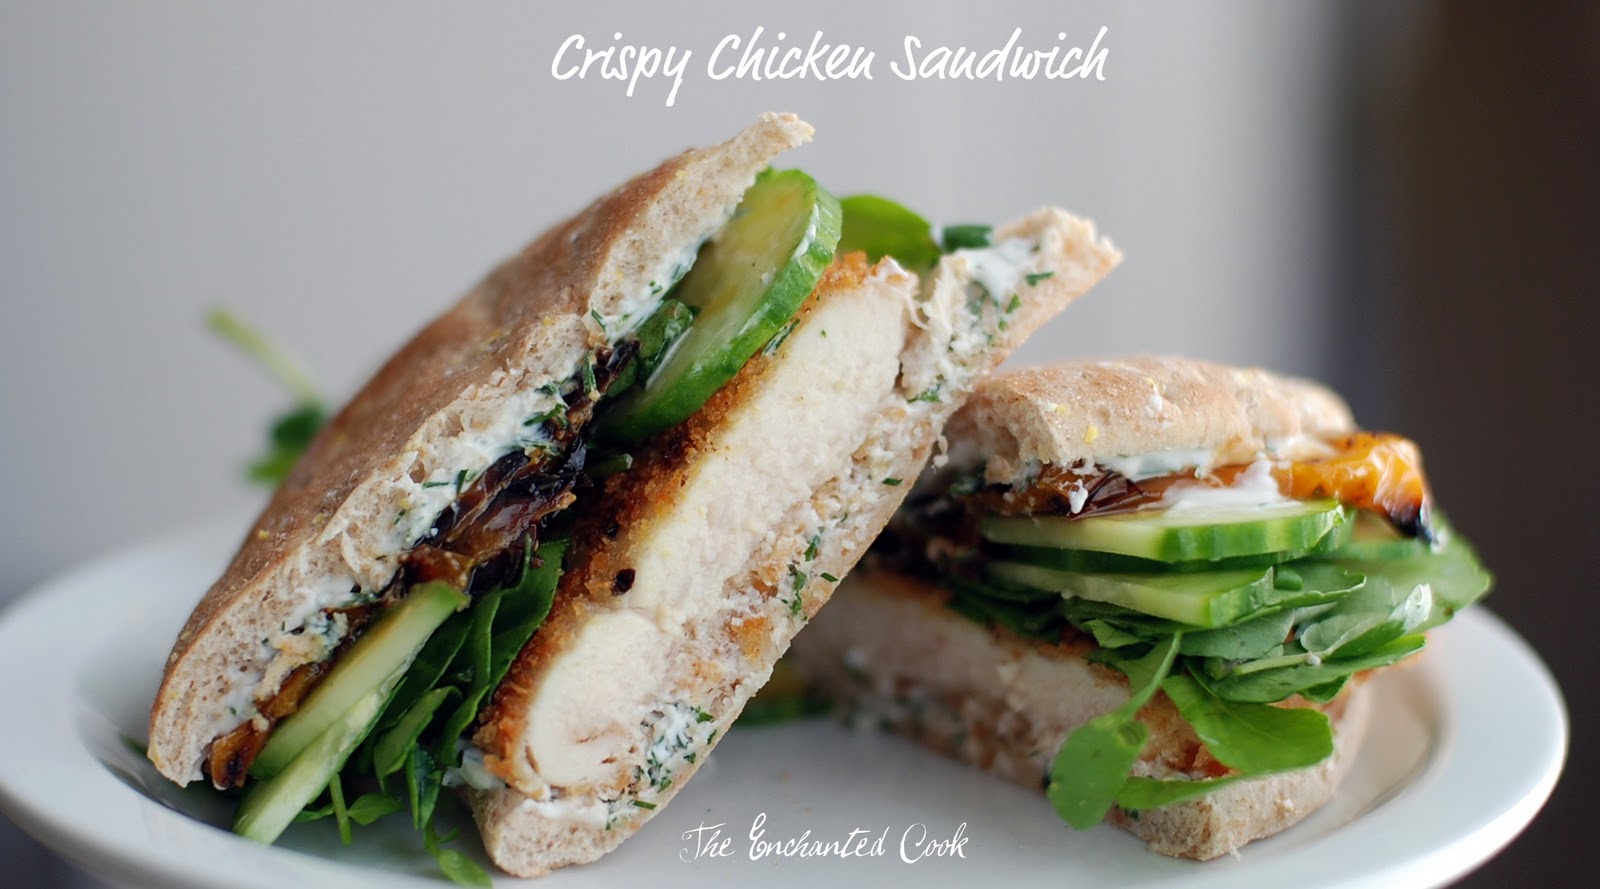 The Enchanted Cook: Crispy Chicken Sandwich